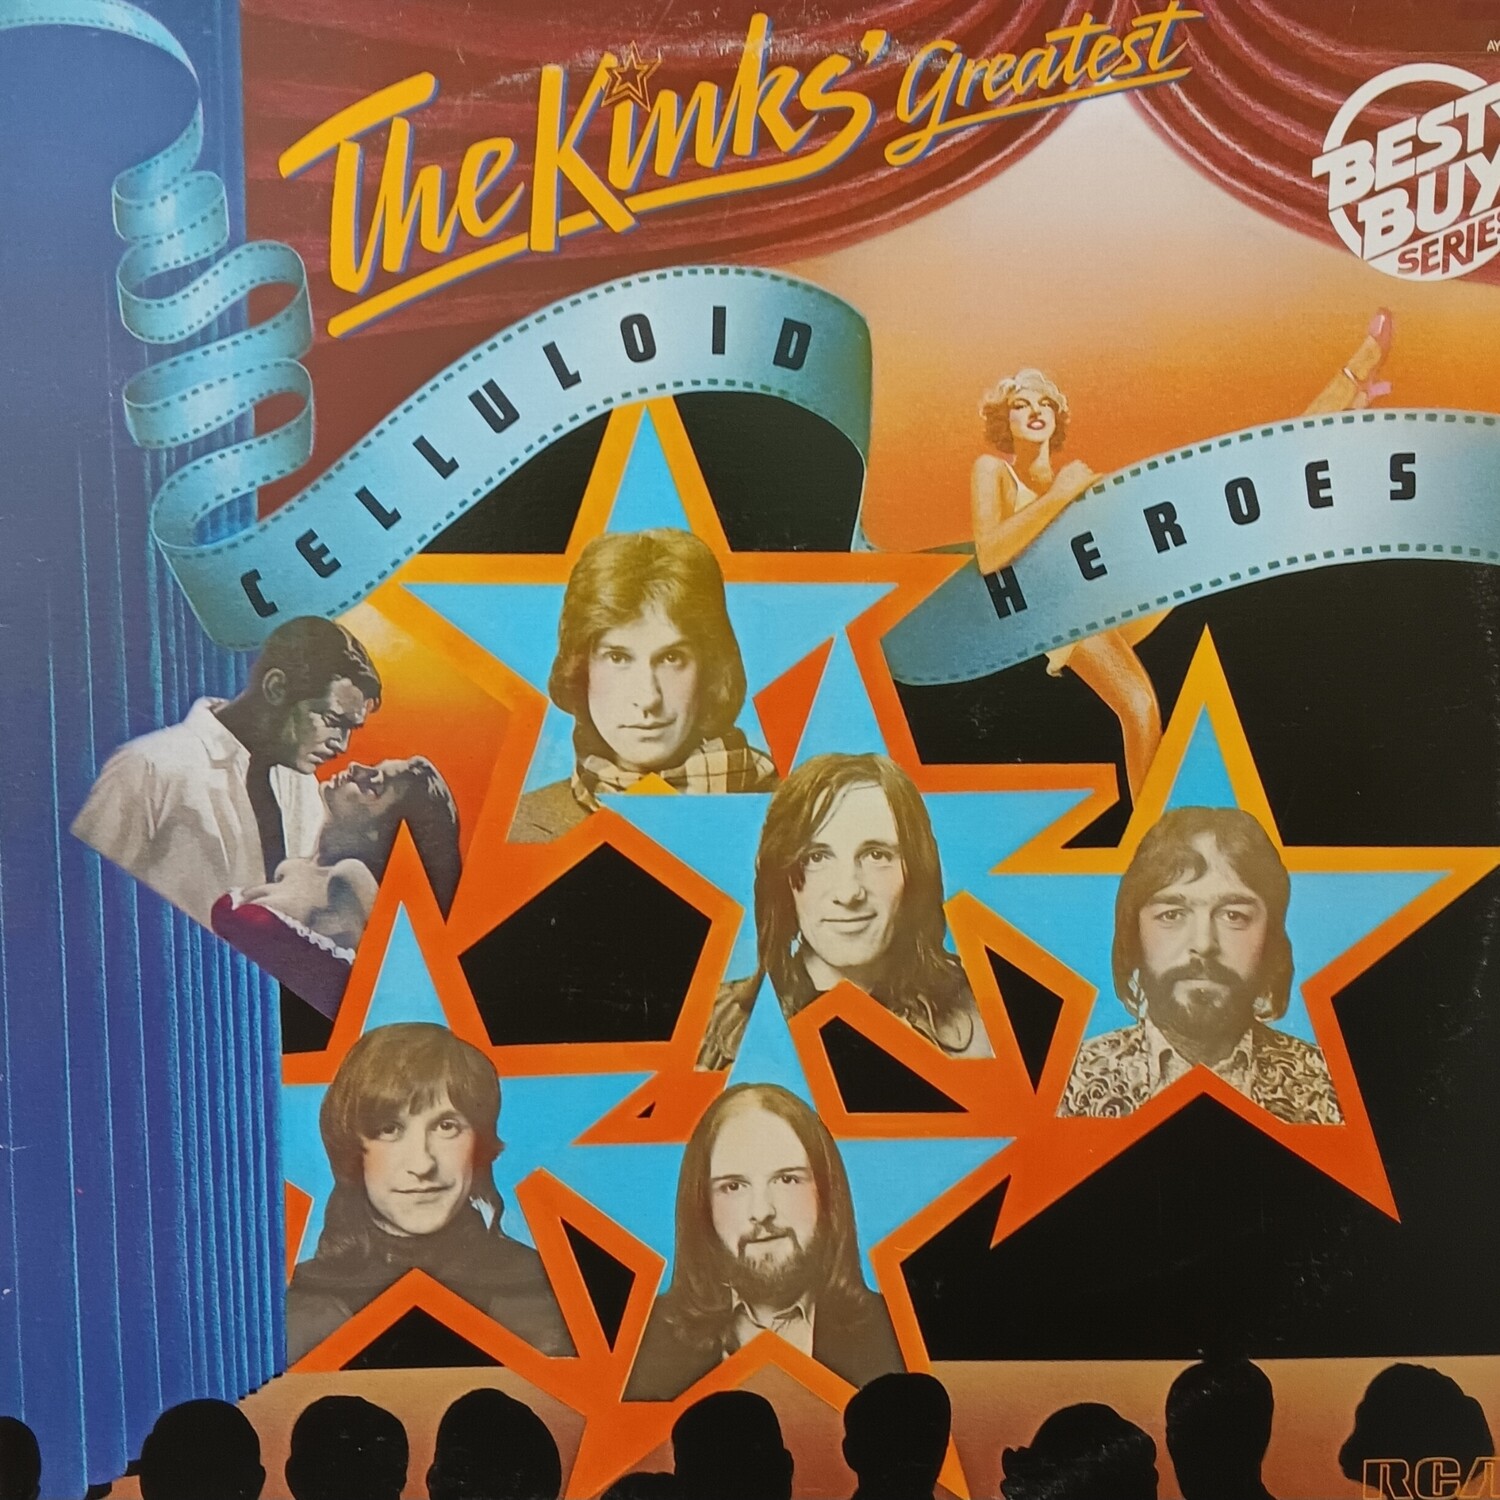 THE KINKS - Celluloid Heroes